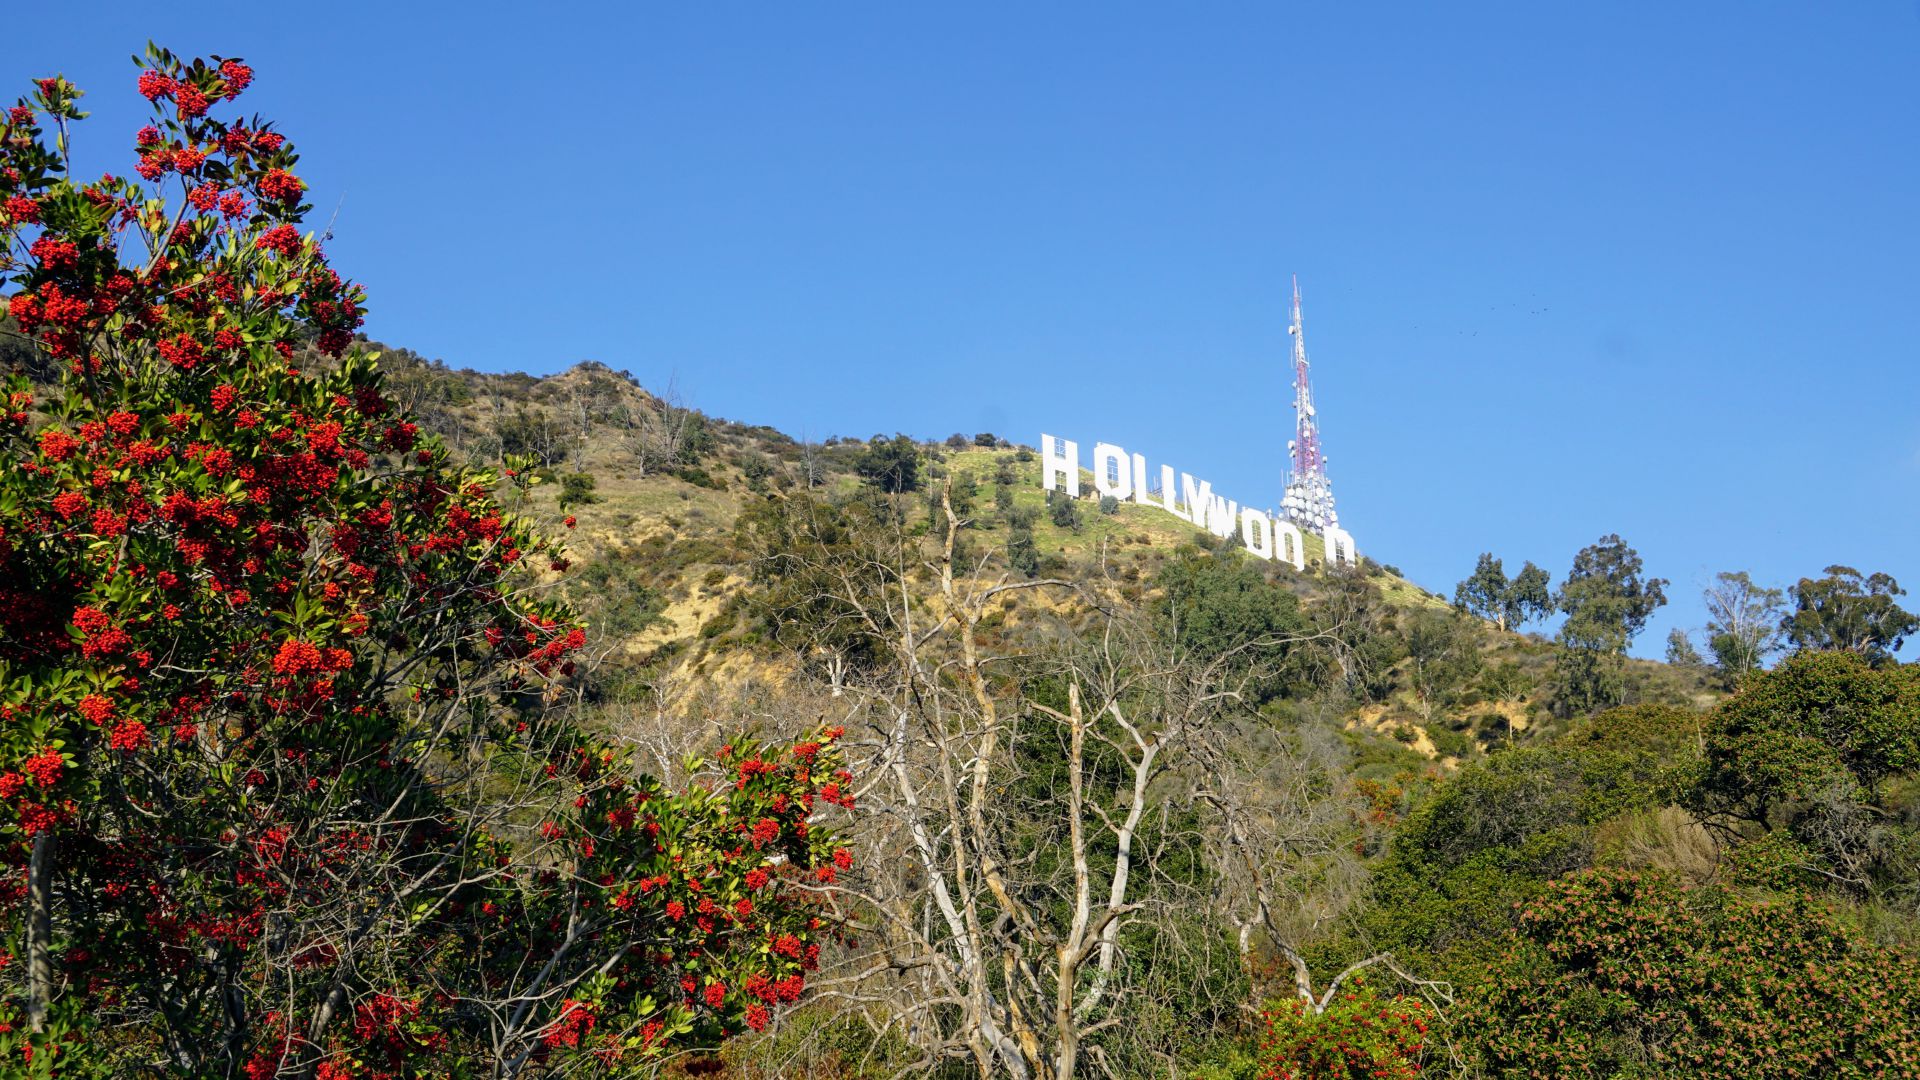 Los Angeles, CA - Hollywood sign